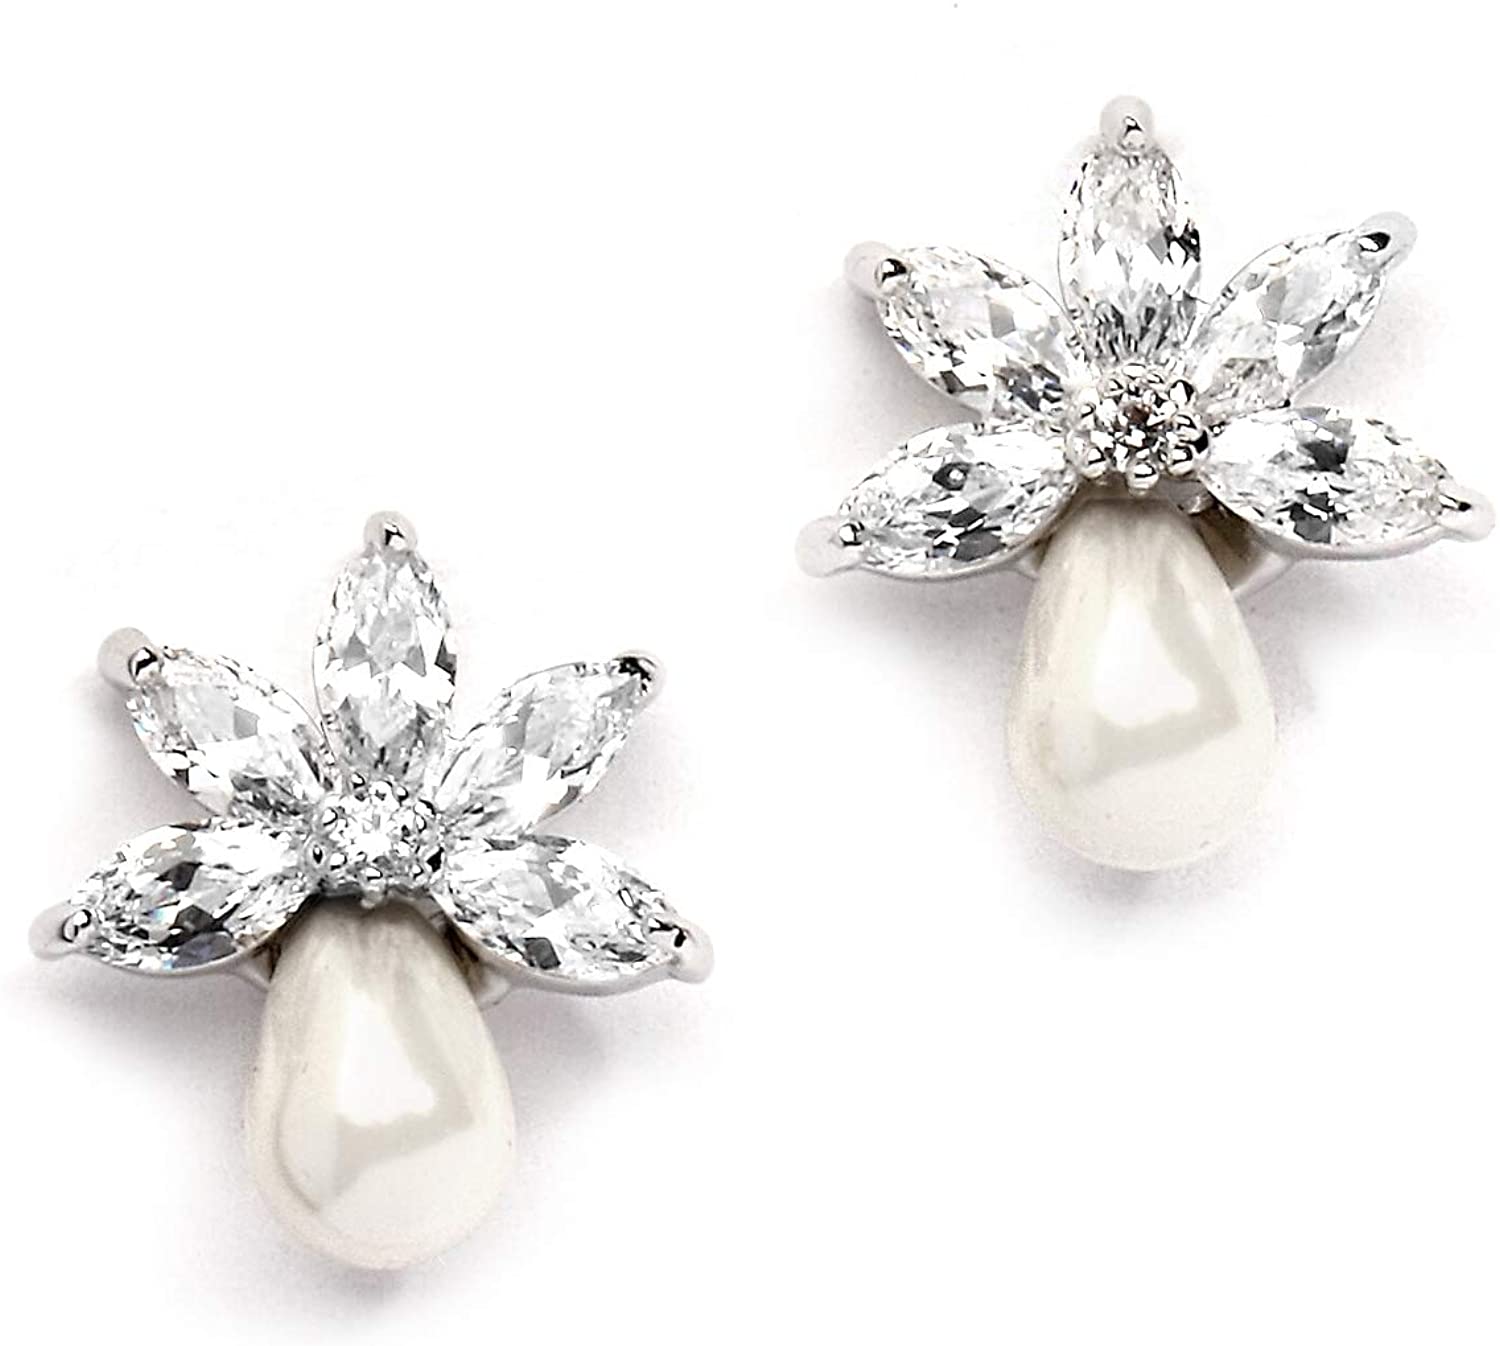 Diamond Earrings Every Woman Must Own for Special Occasions 41669 1 - Diamond Earrings Every Woman Must Own for Special Occasions